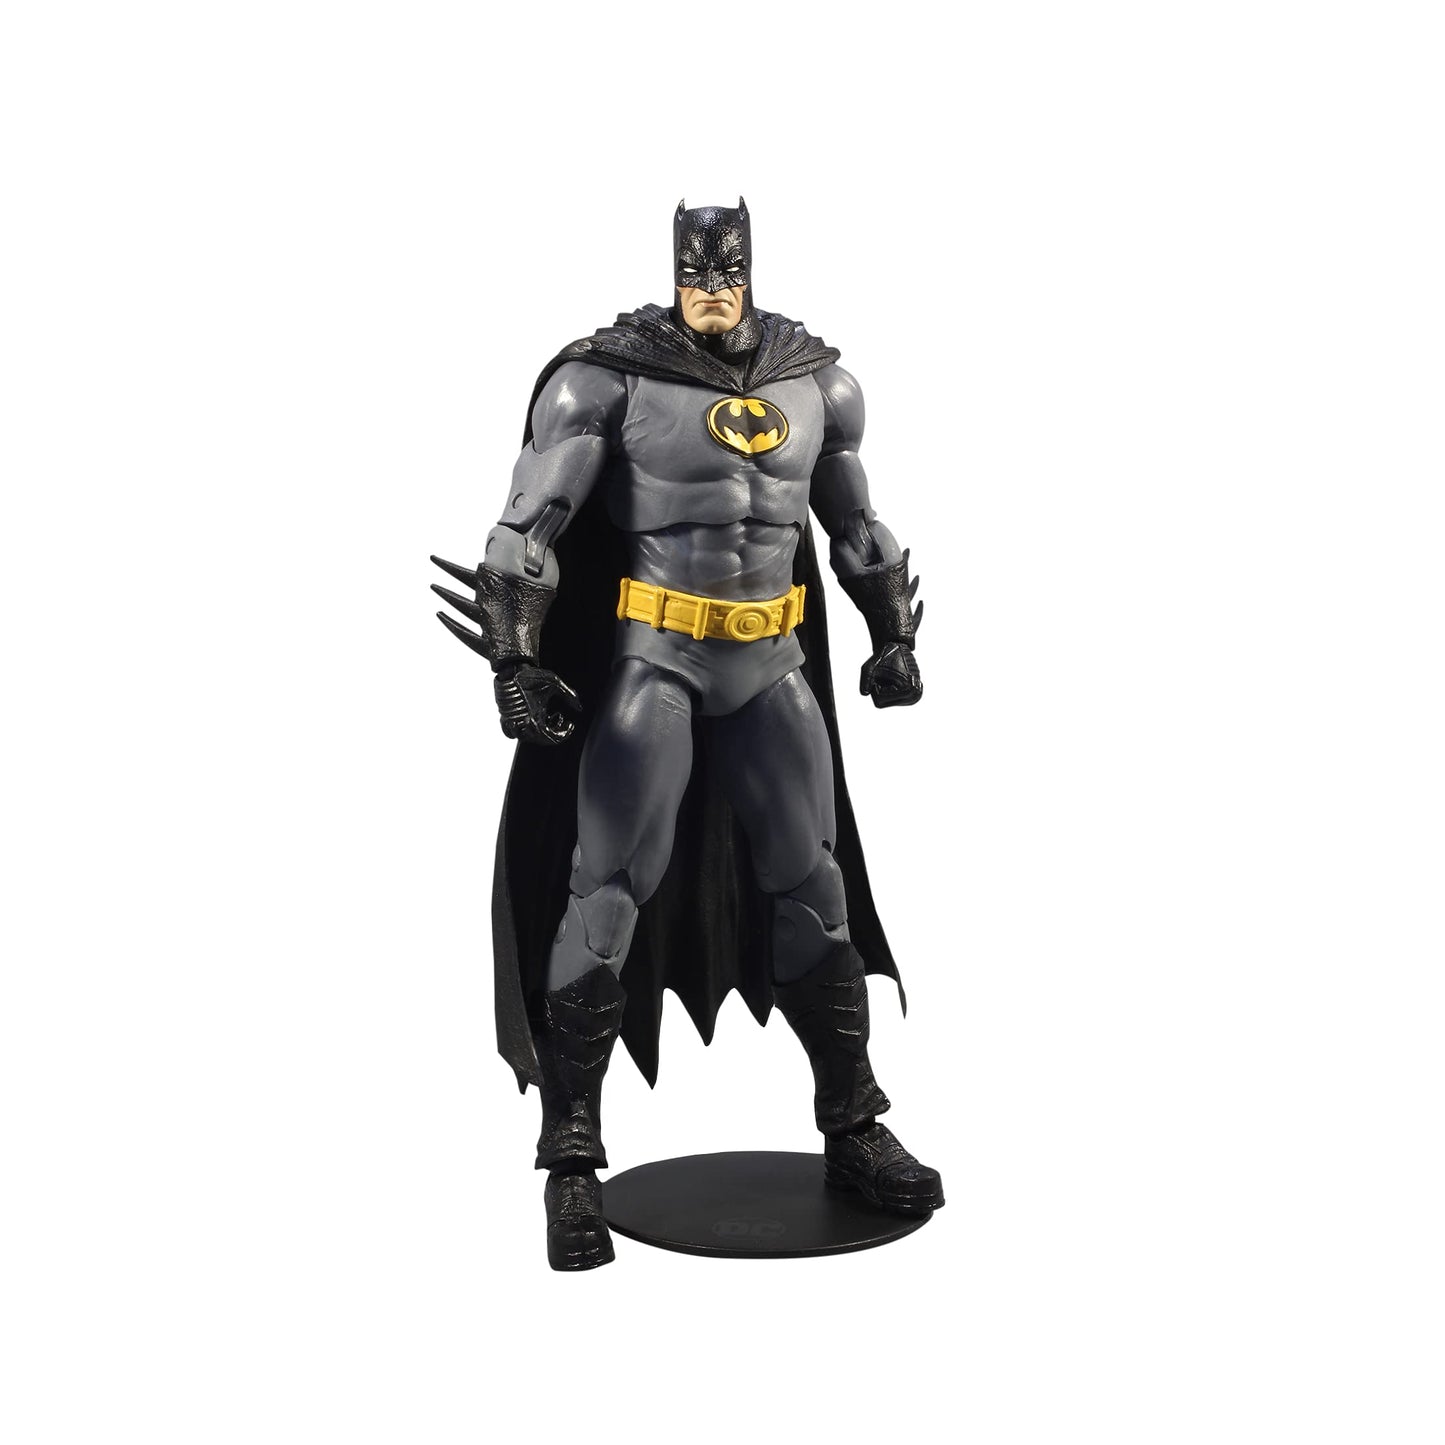 DC Multiverse Batman from Batman: Three Jokers 7" Action Figure with Accessories